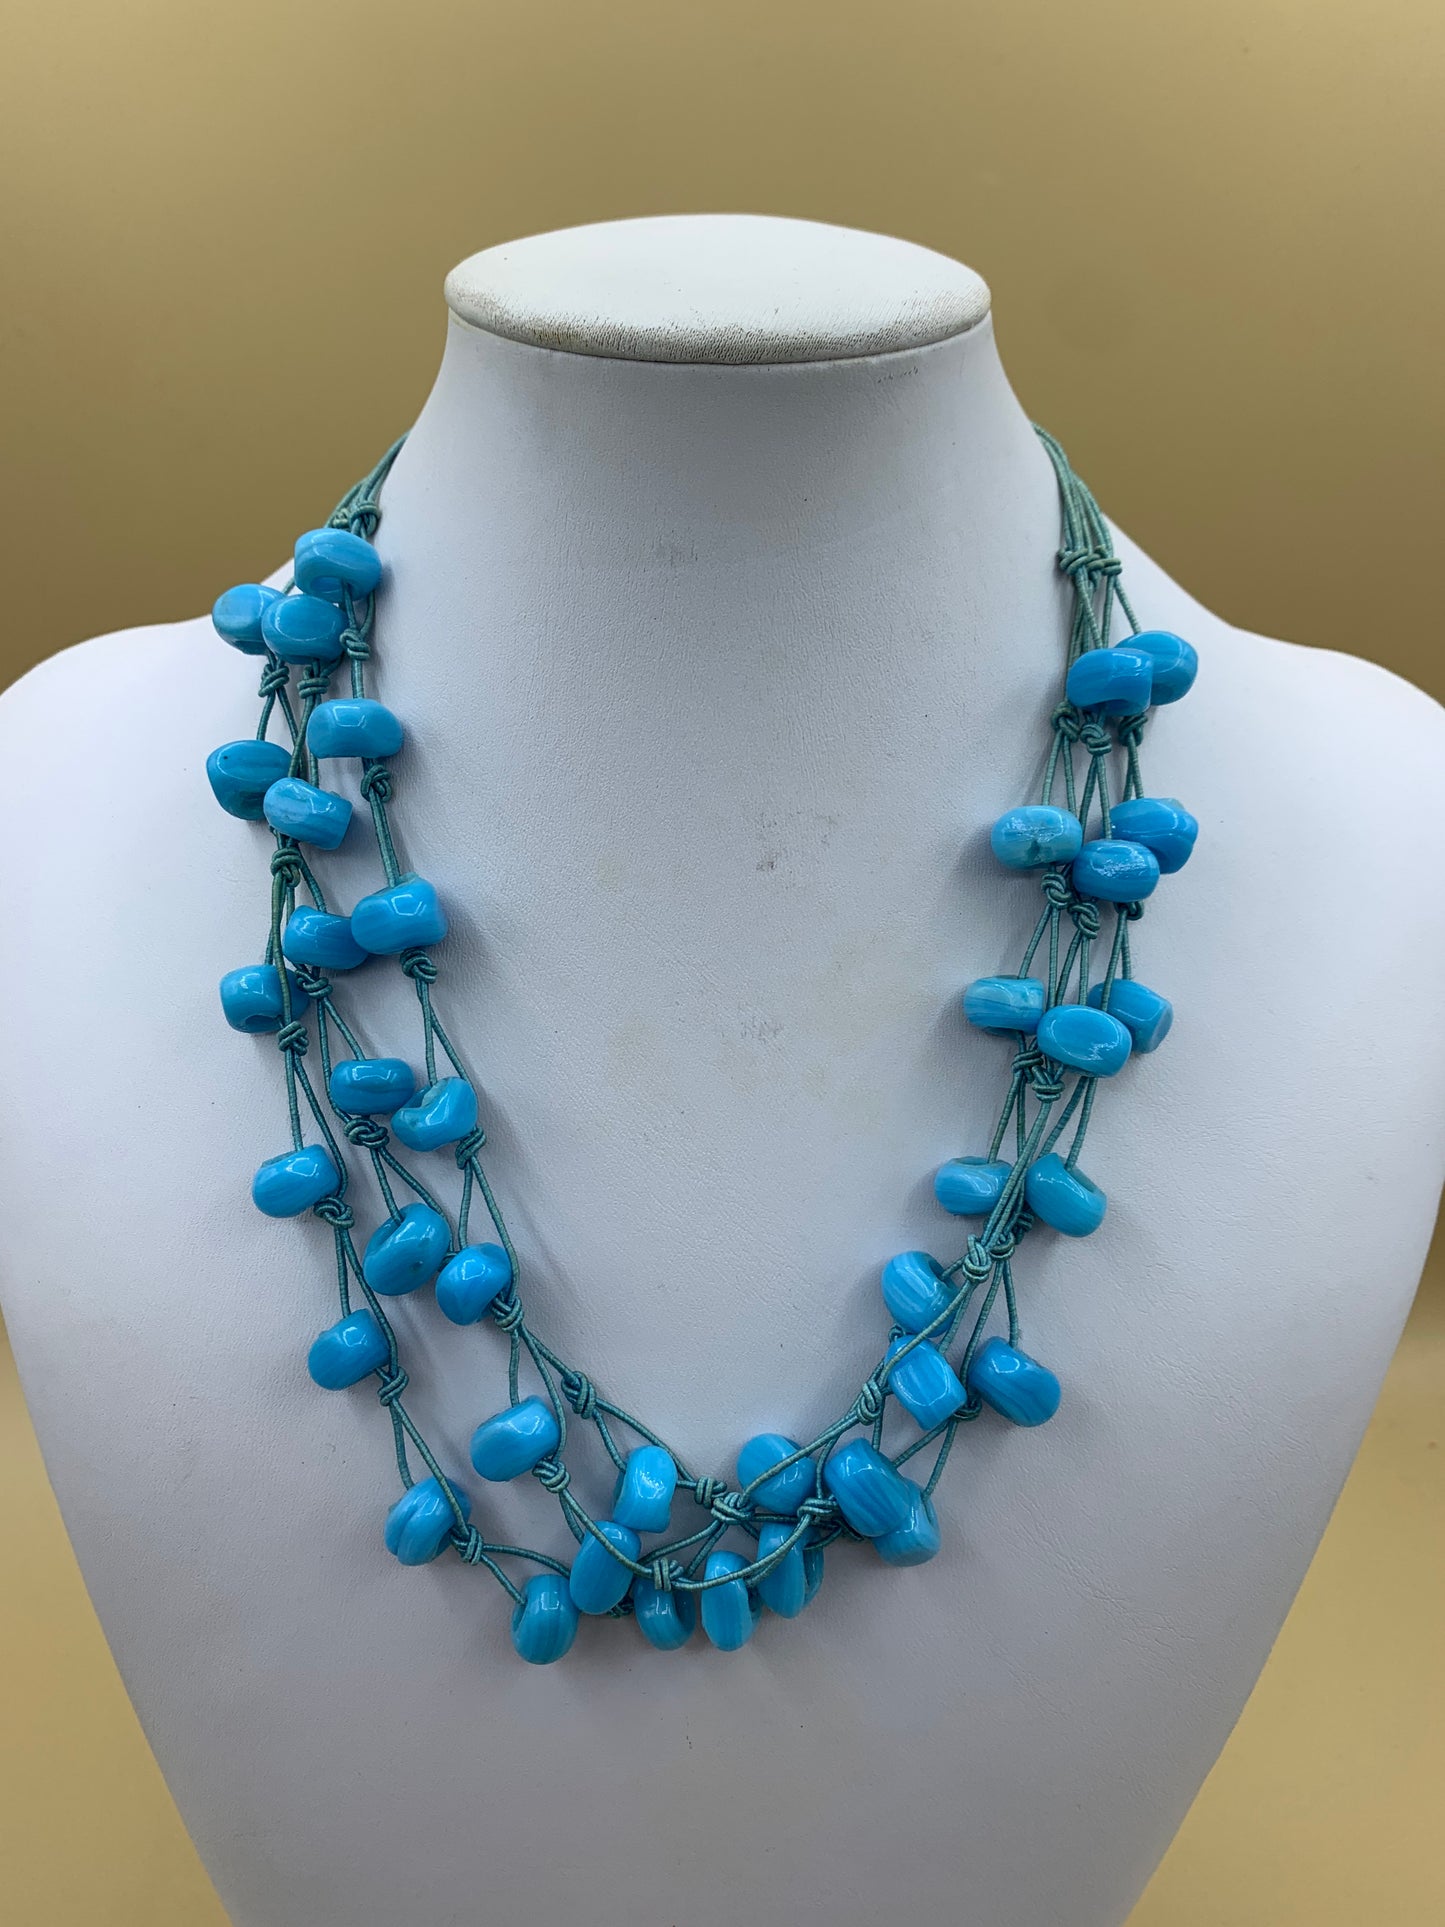 Multi-strand choker necklace with turquoise glass beads